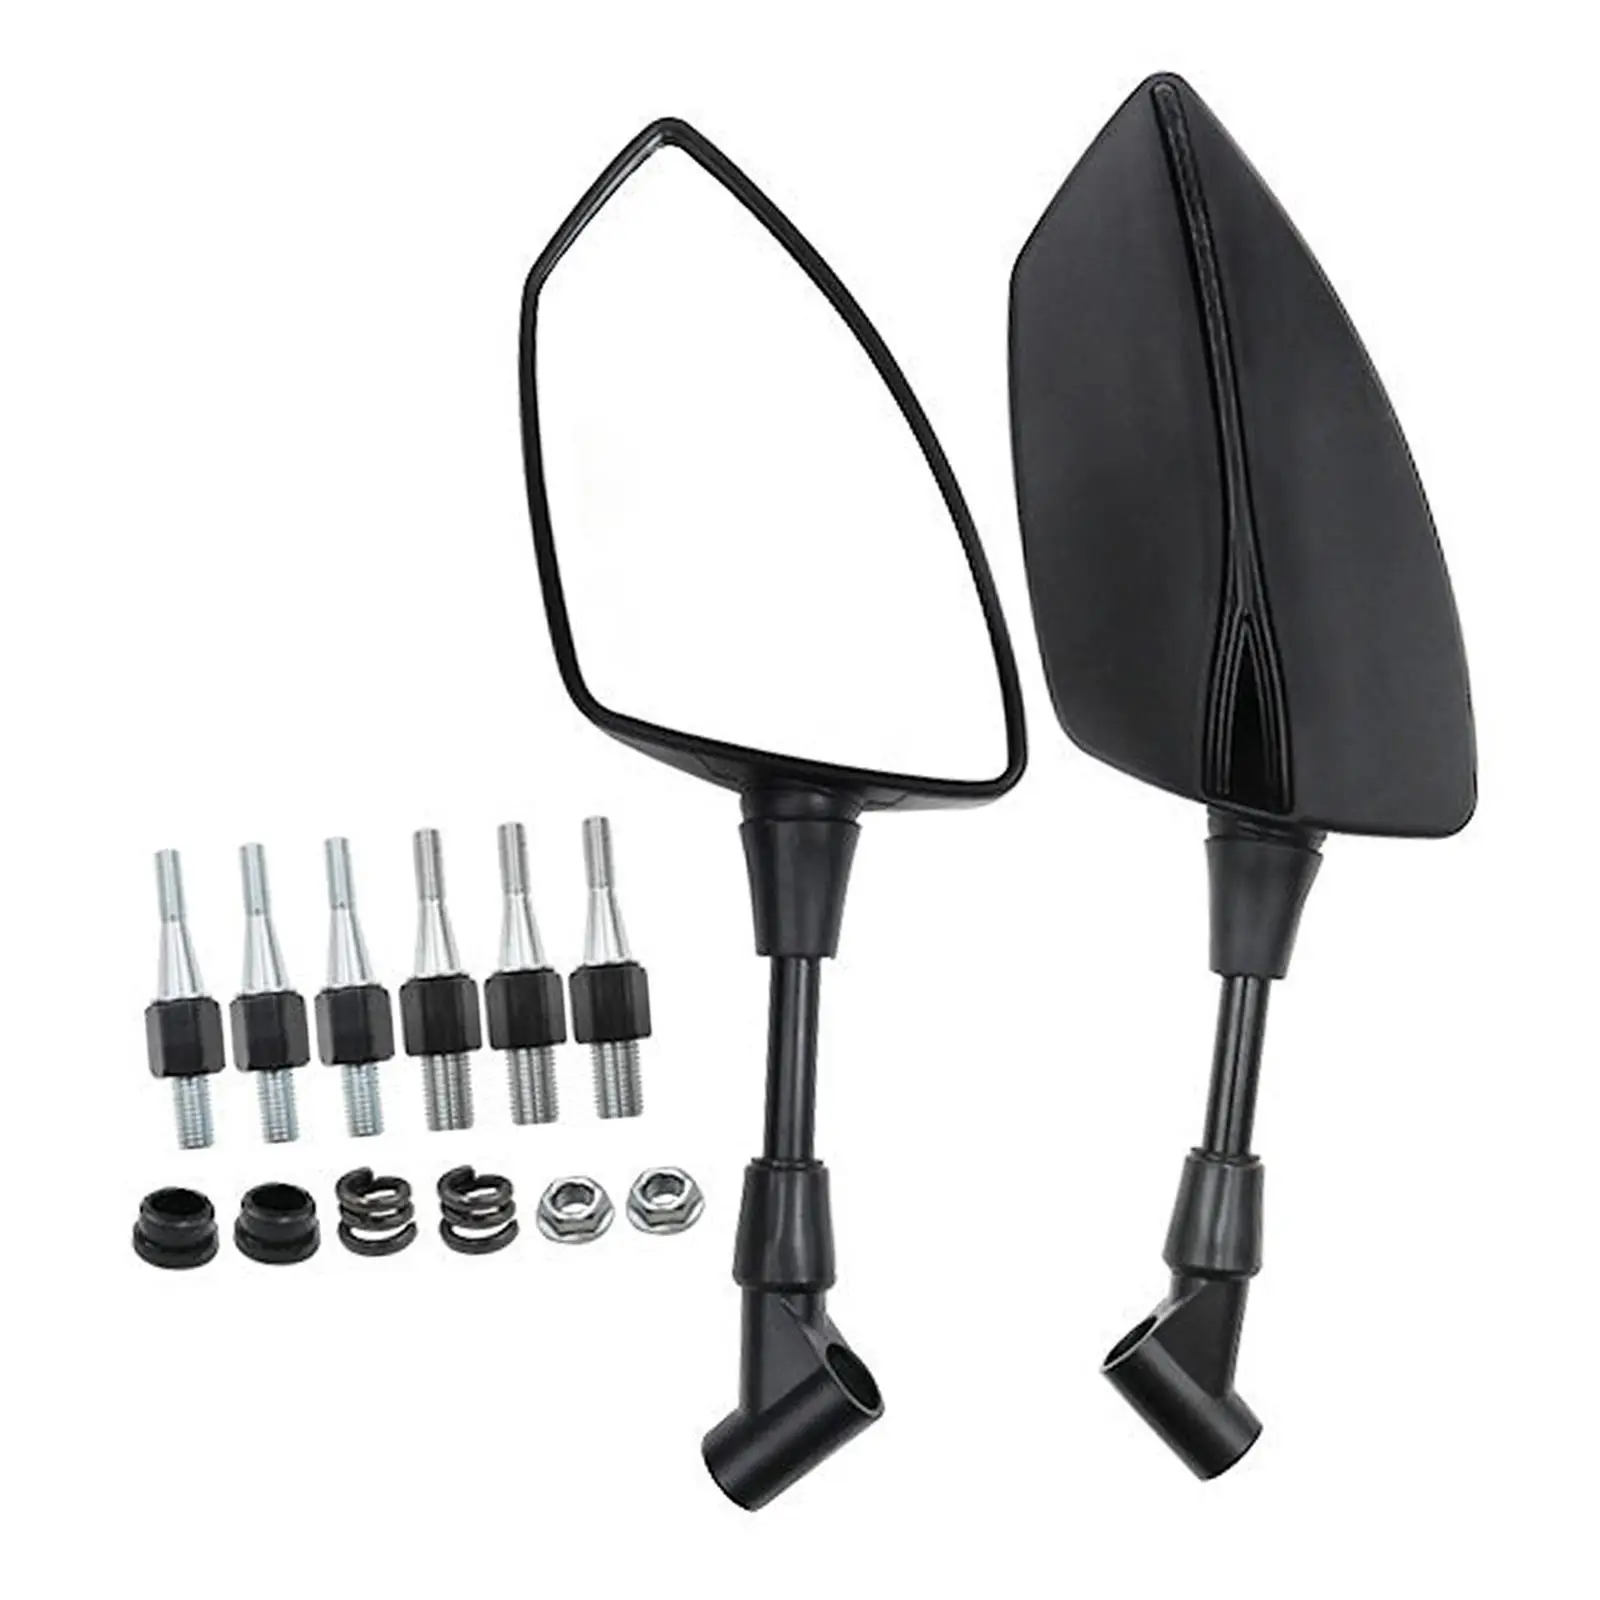 1 Set Motorcycle Rearview Mirror Devices Replaces Professional Spare Parts